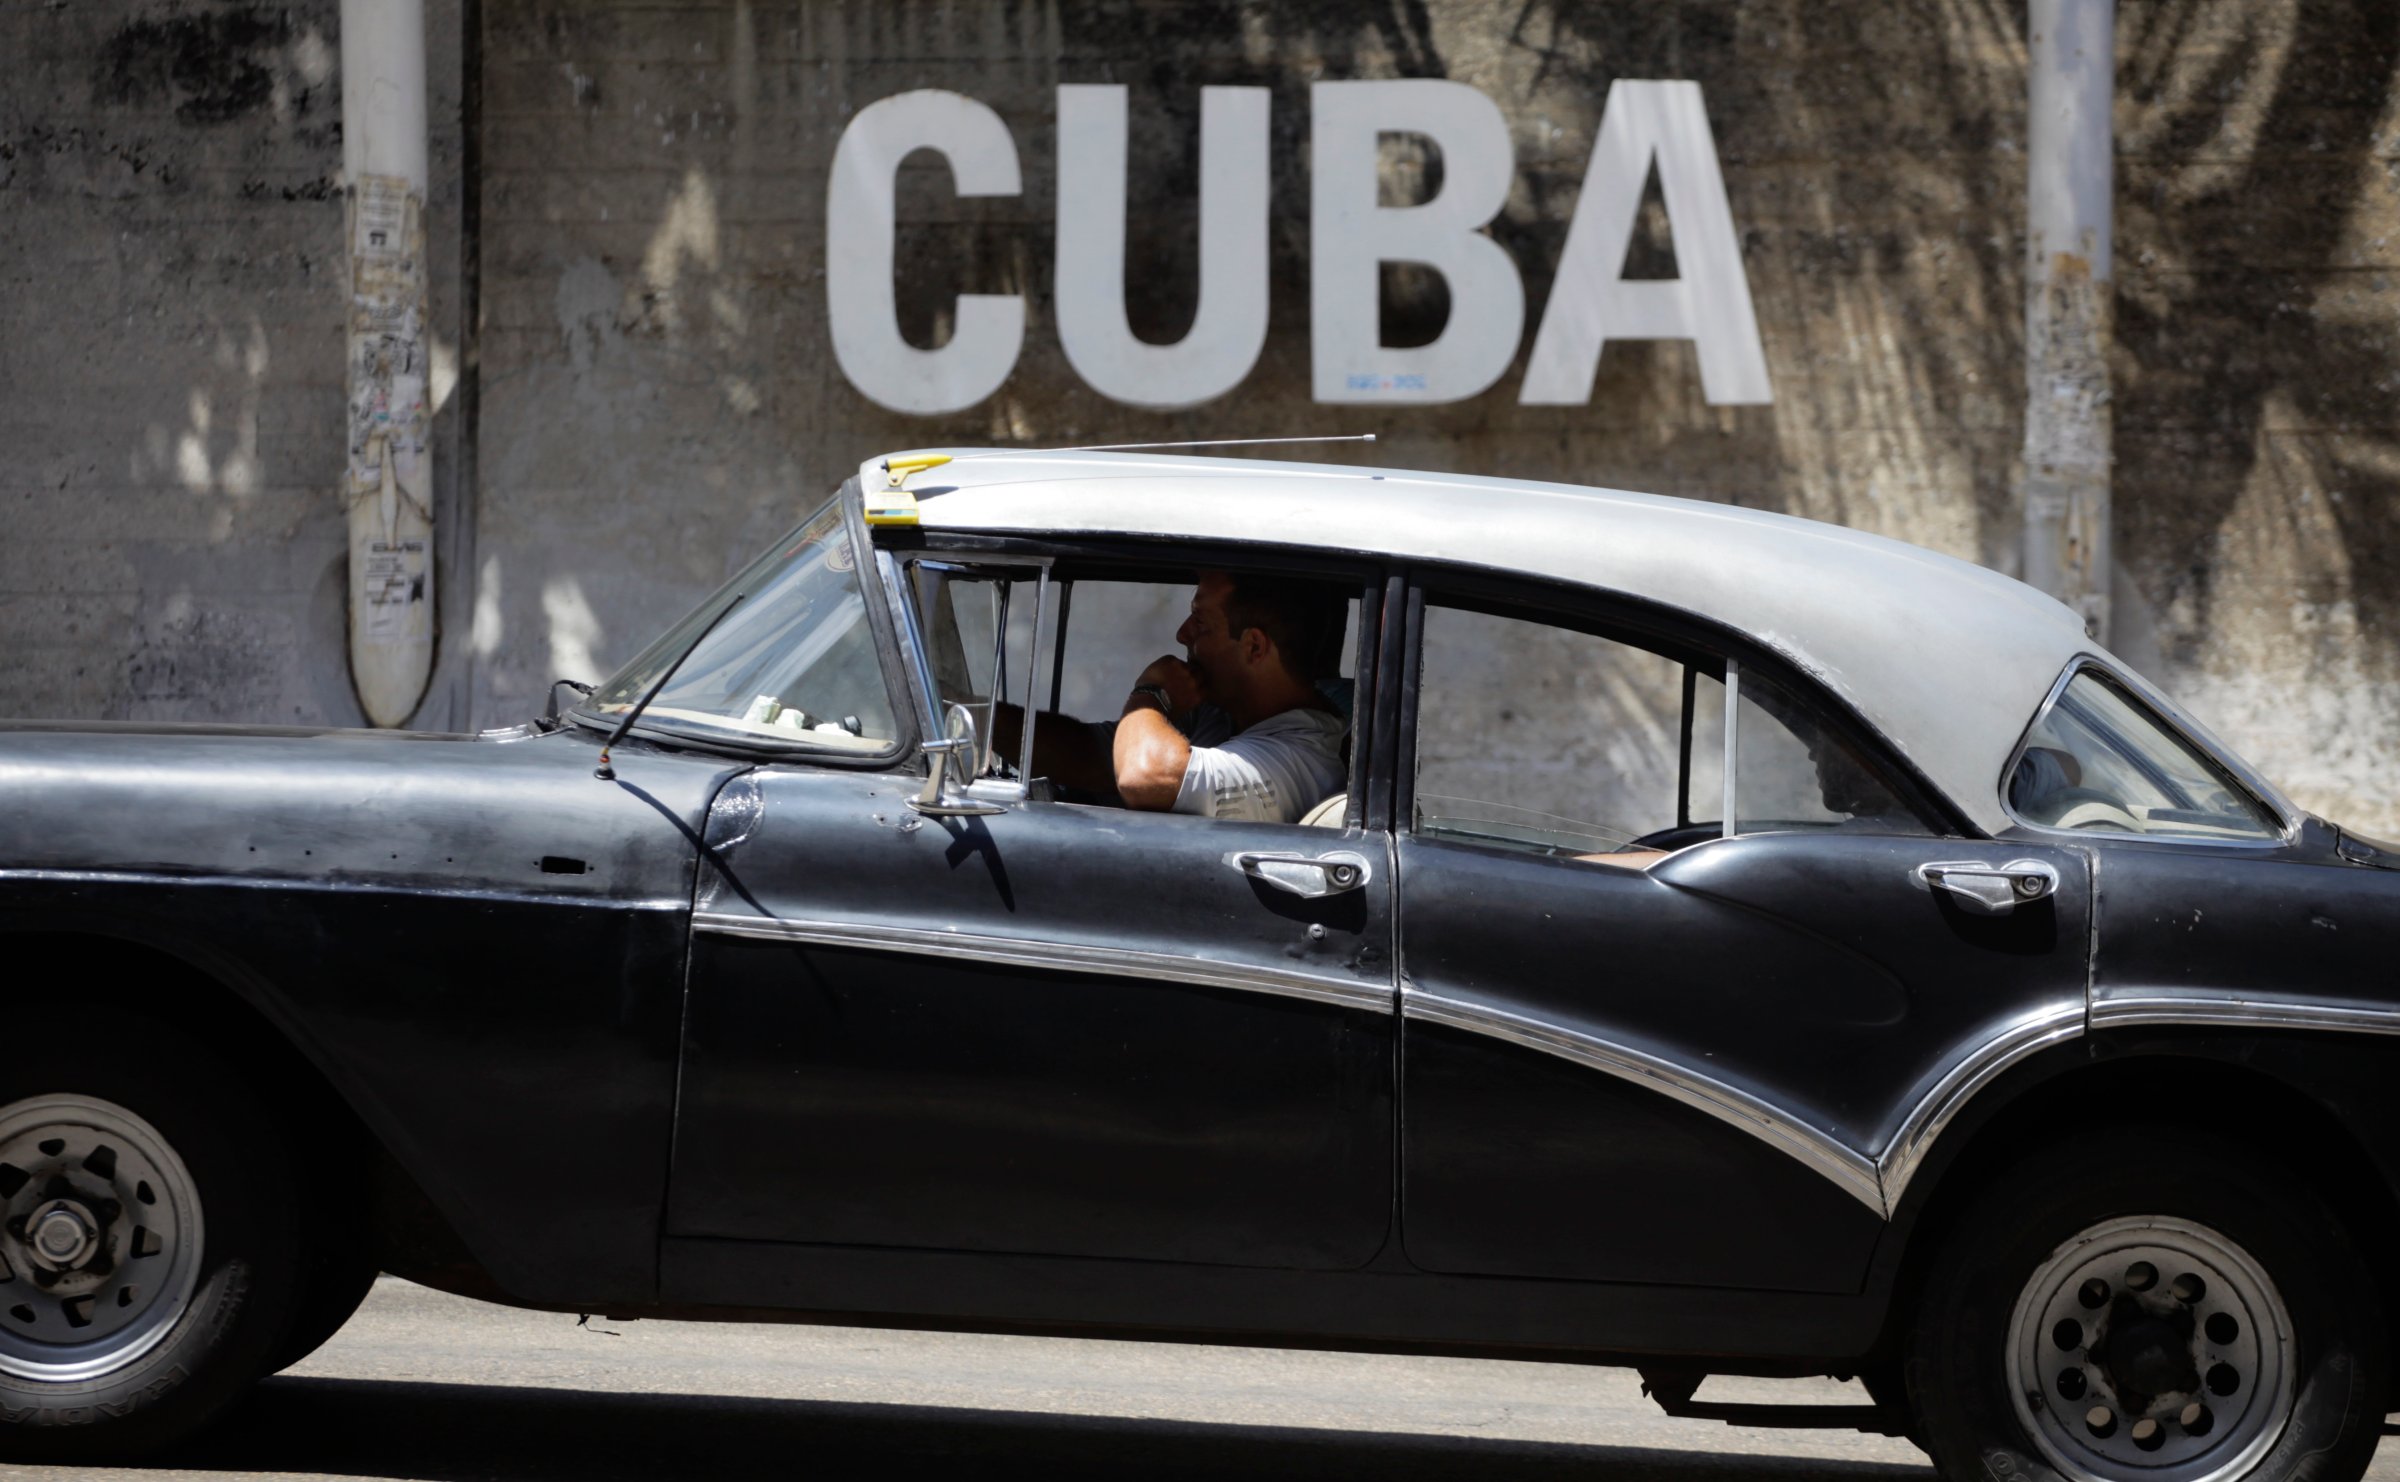 A man drives his taxi past a Cultural Center with the word "Cuba" on it, in Havana, Cuba,, April 14, 2015